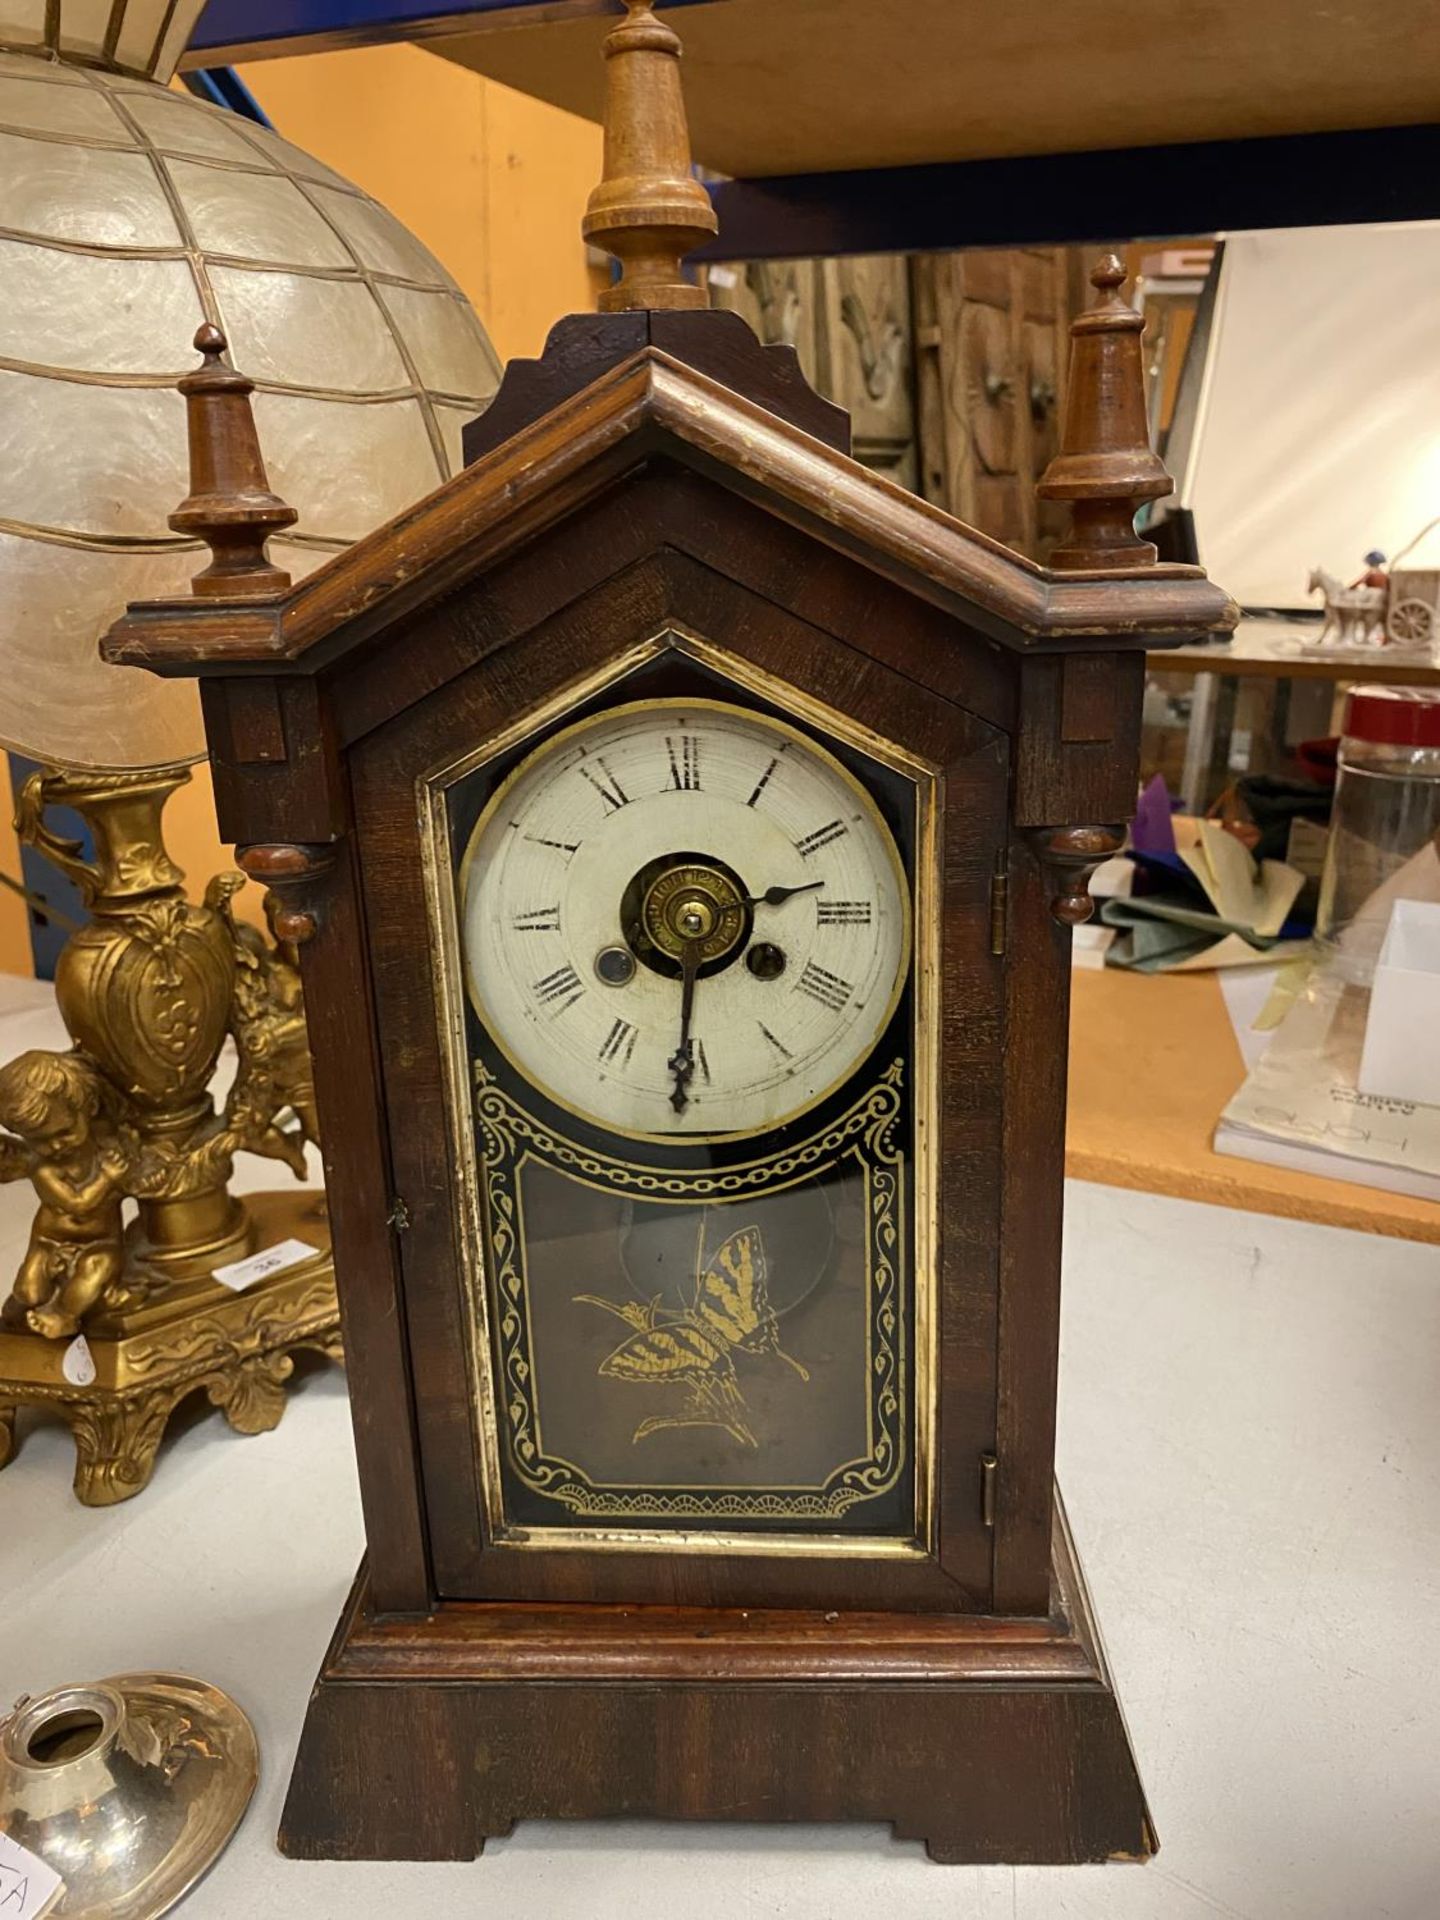 A VINTAGE AMERICAN GOTHIC STYLE CLOCK IN A WOODEN AND GLASS CASE WITH A BUTTERFLY PATTERN ON THE - Image 2 of 8